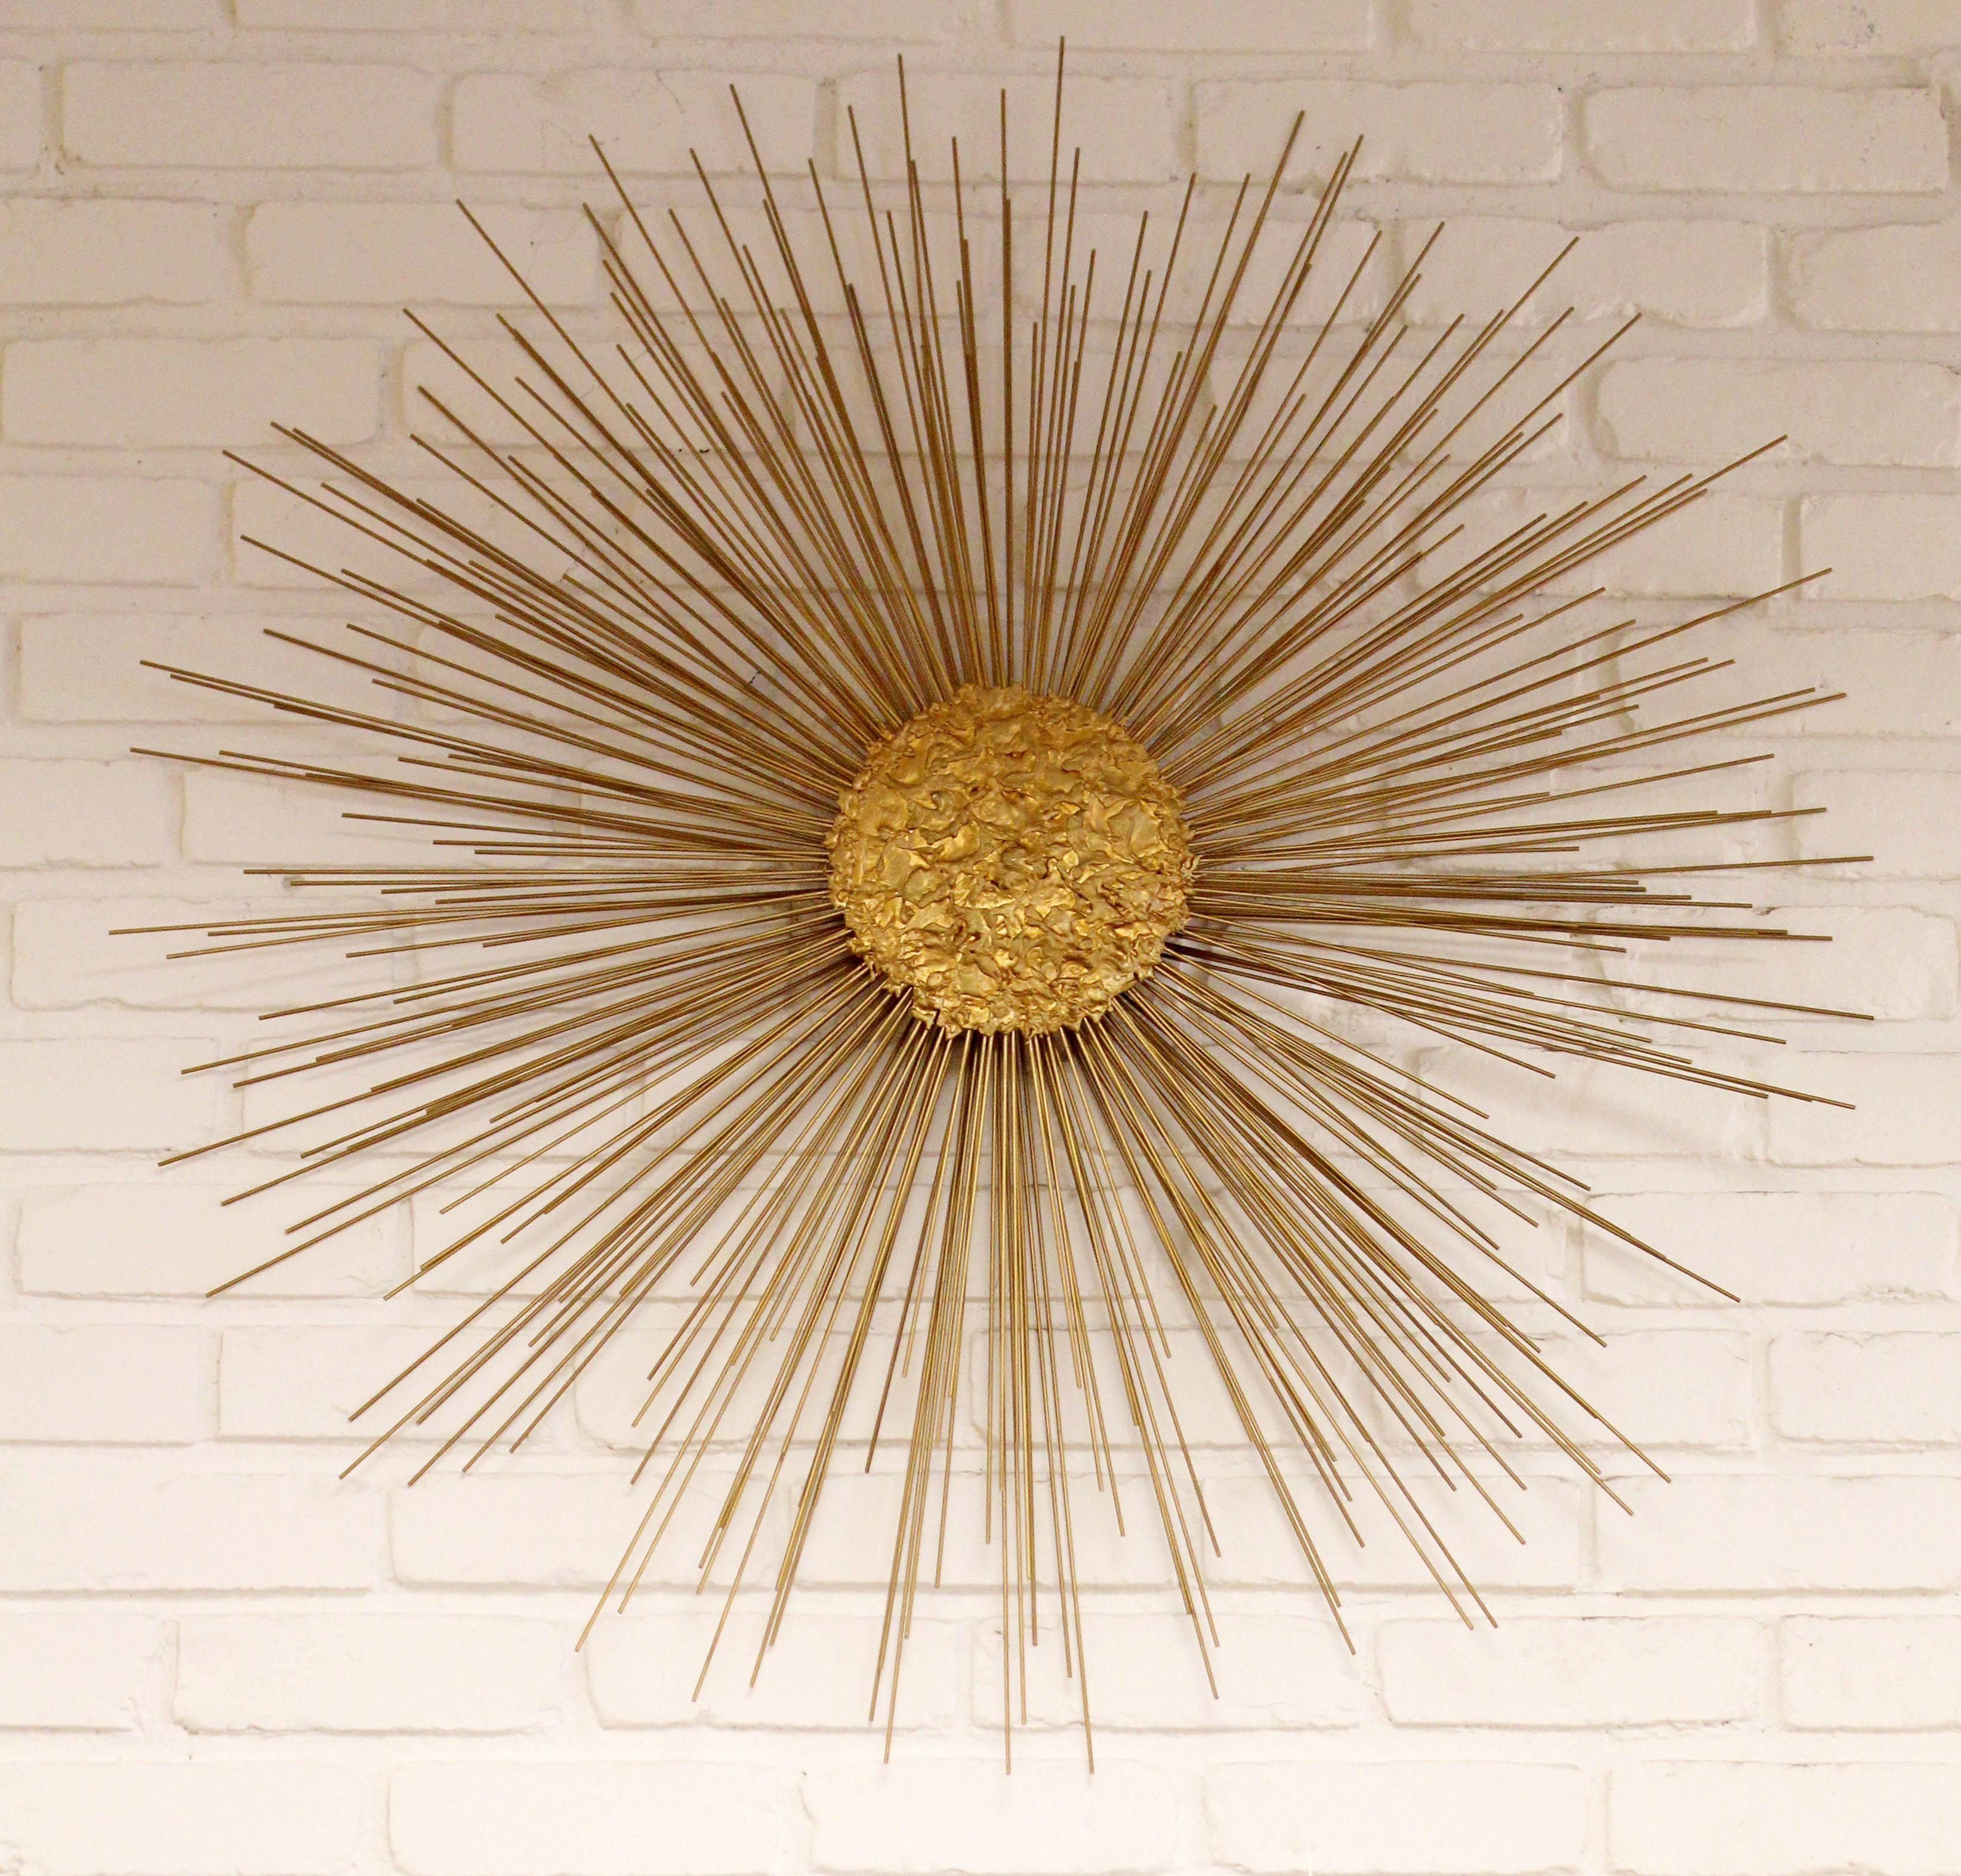 For your consideration is a beautiful, brass, sunburst starburst, hanging wall sculpture by Curtis Jere, circa 1980s. In excellent condition. The dimensions are 40